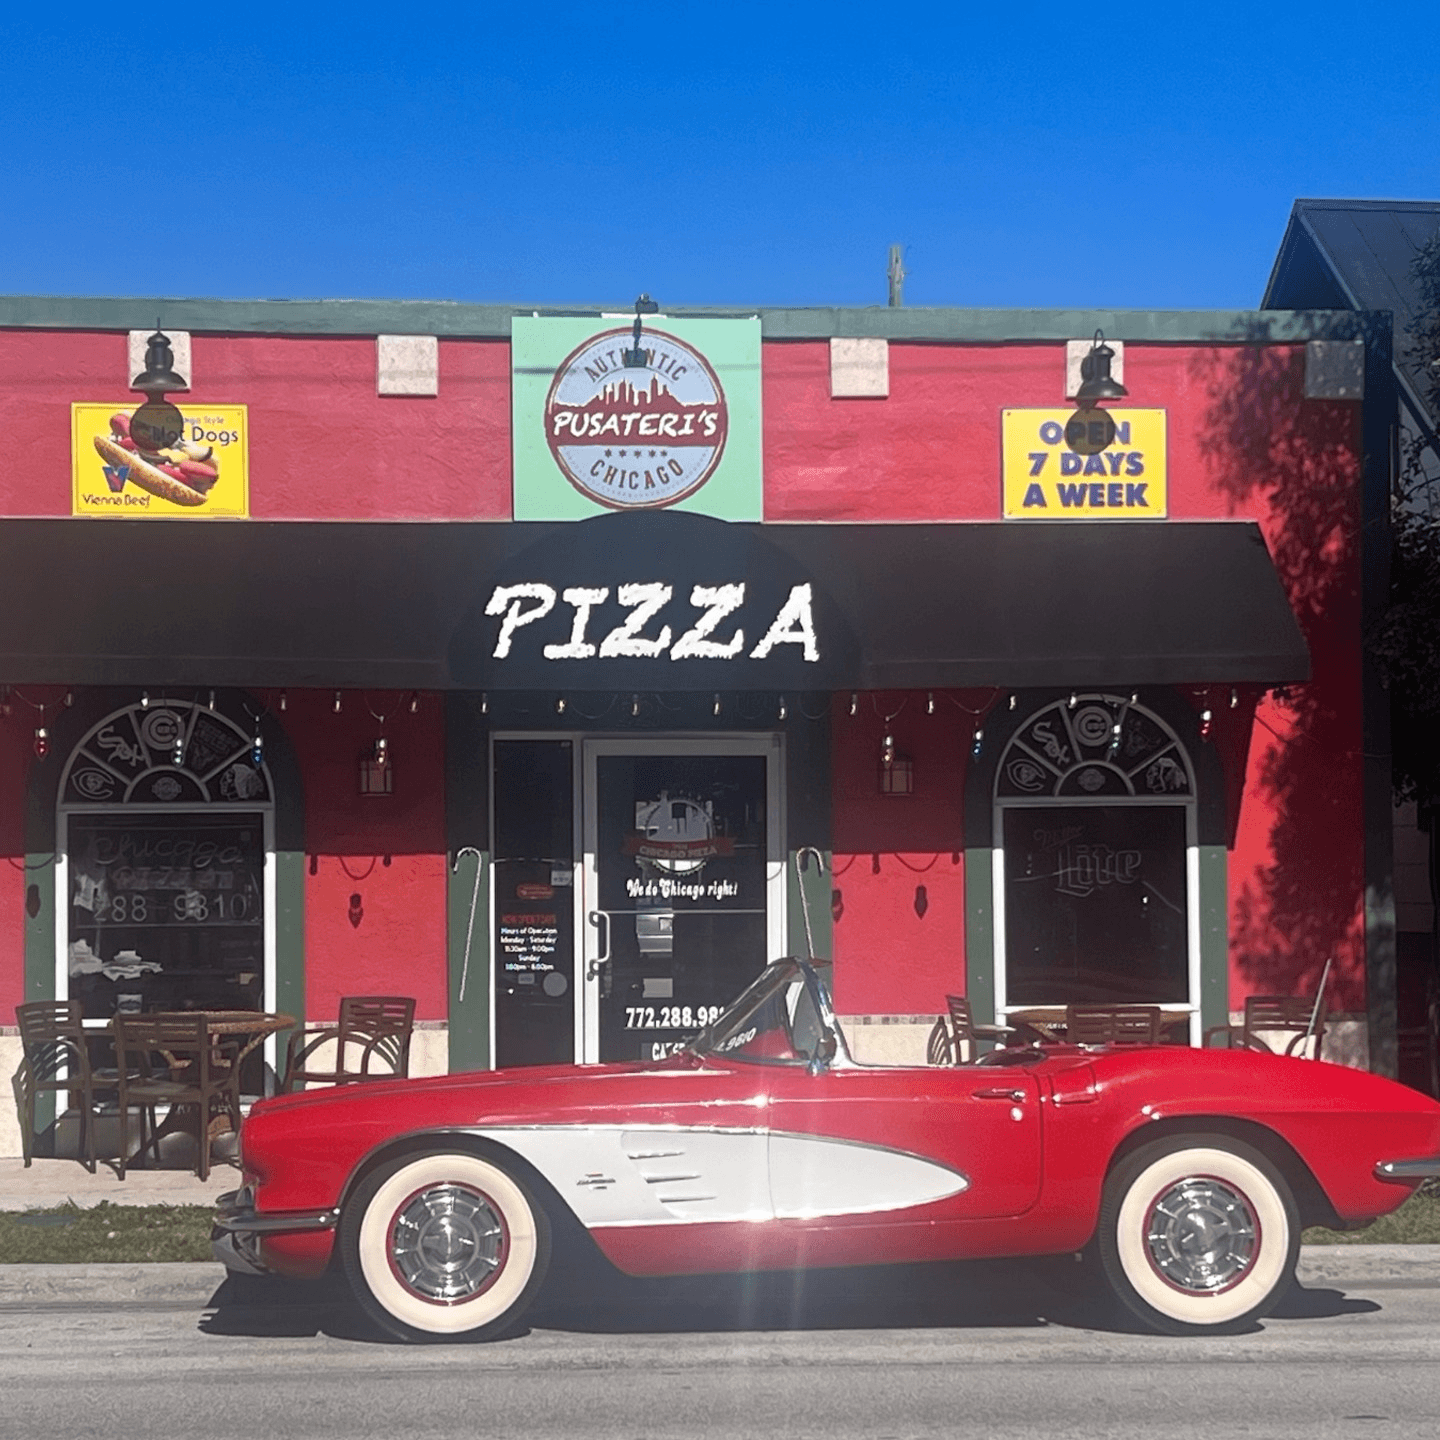 Pusateri's Chicago Pizza, Pick-up and Delivery! 